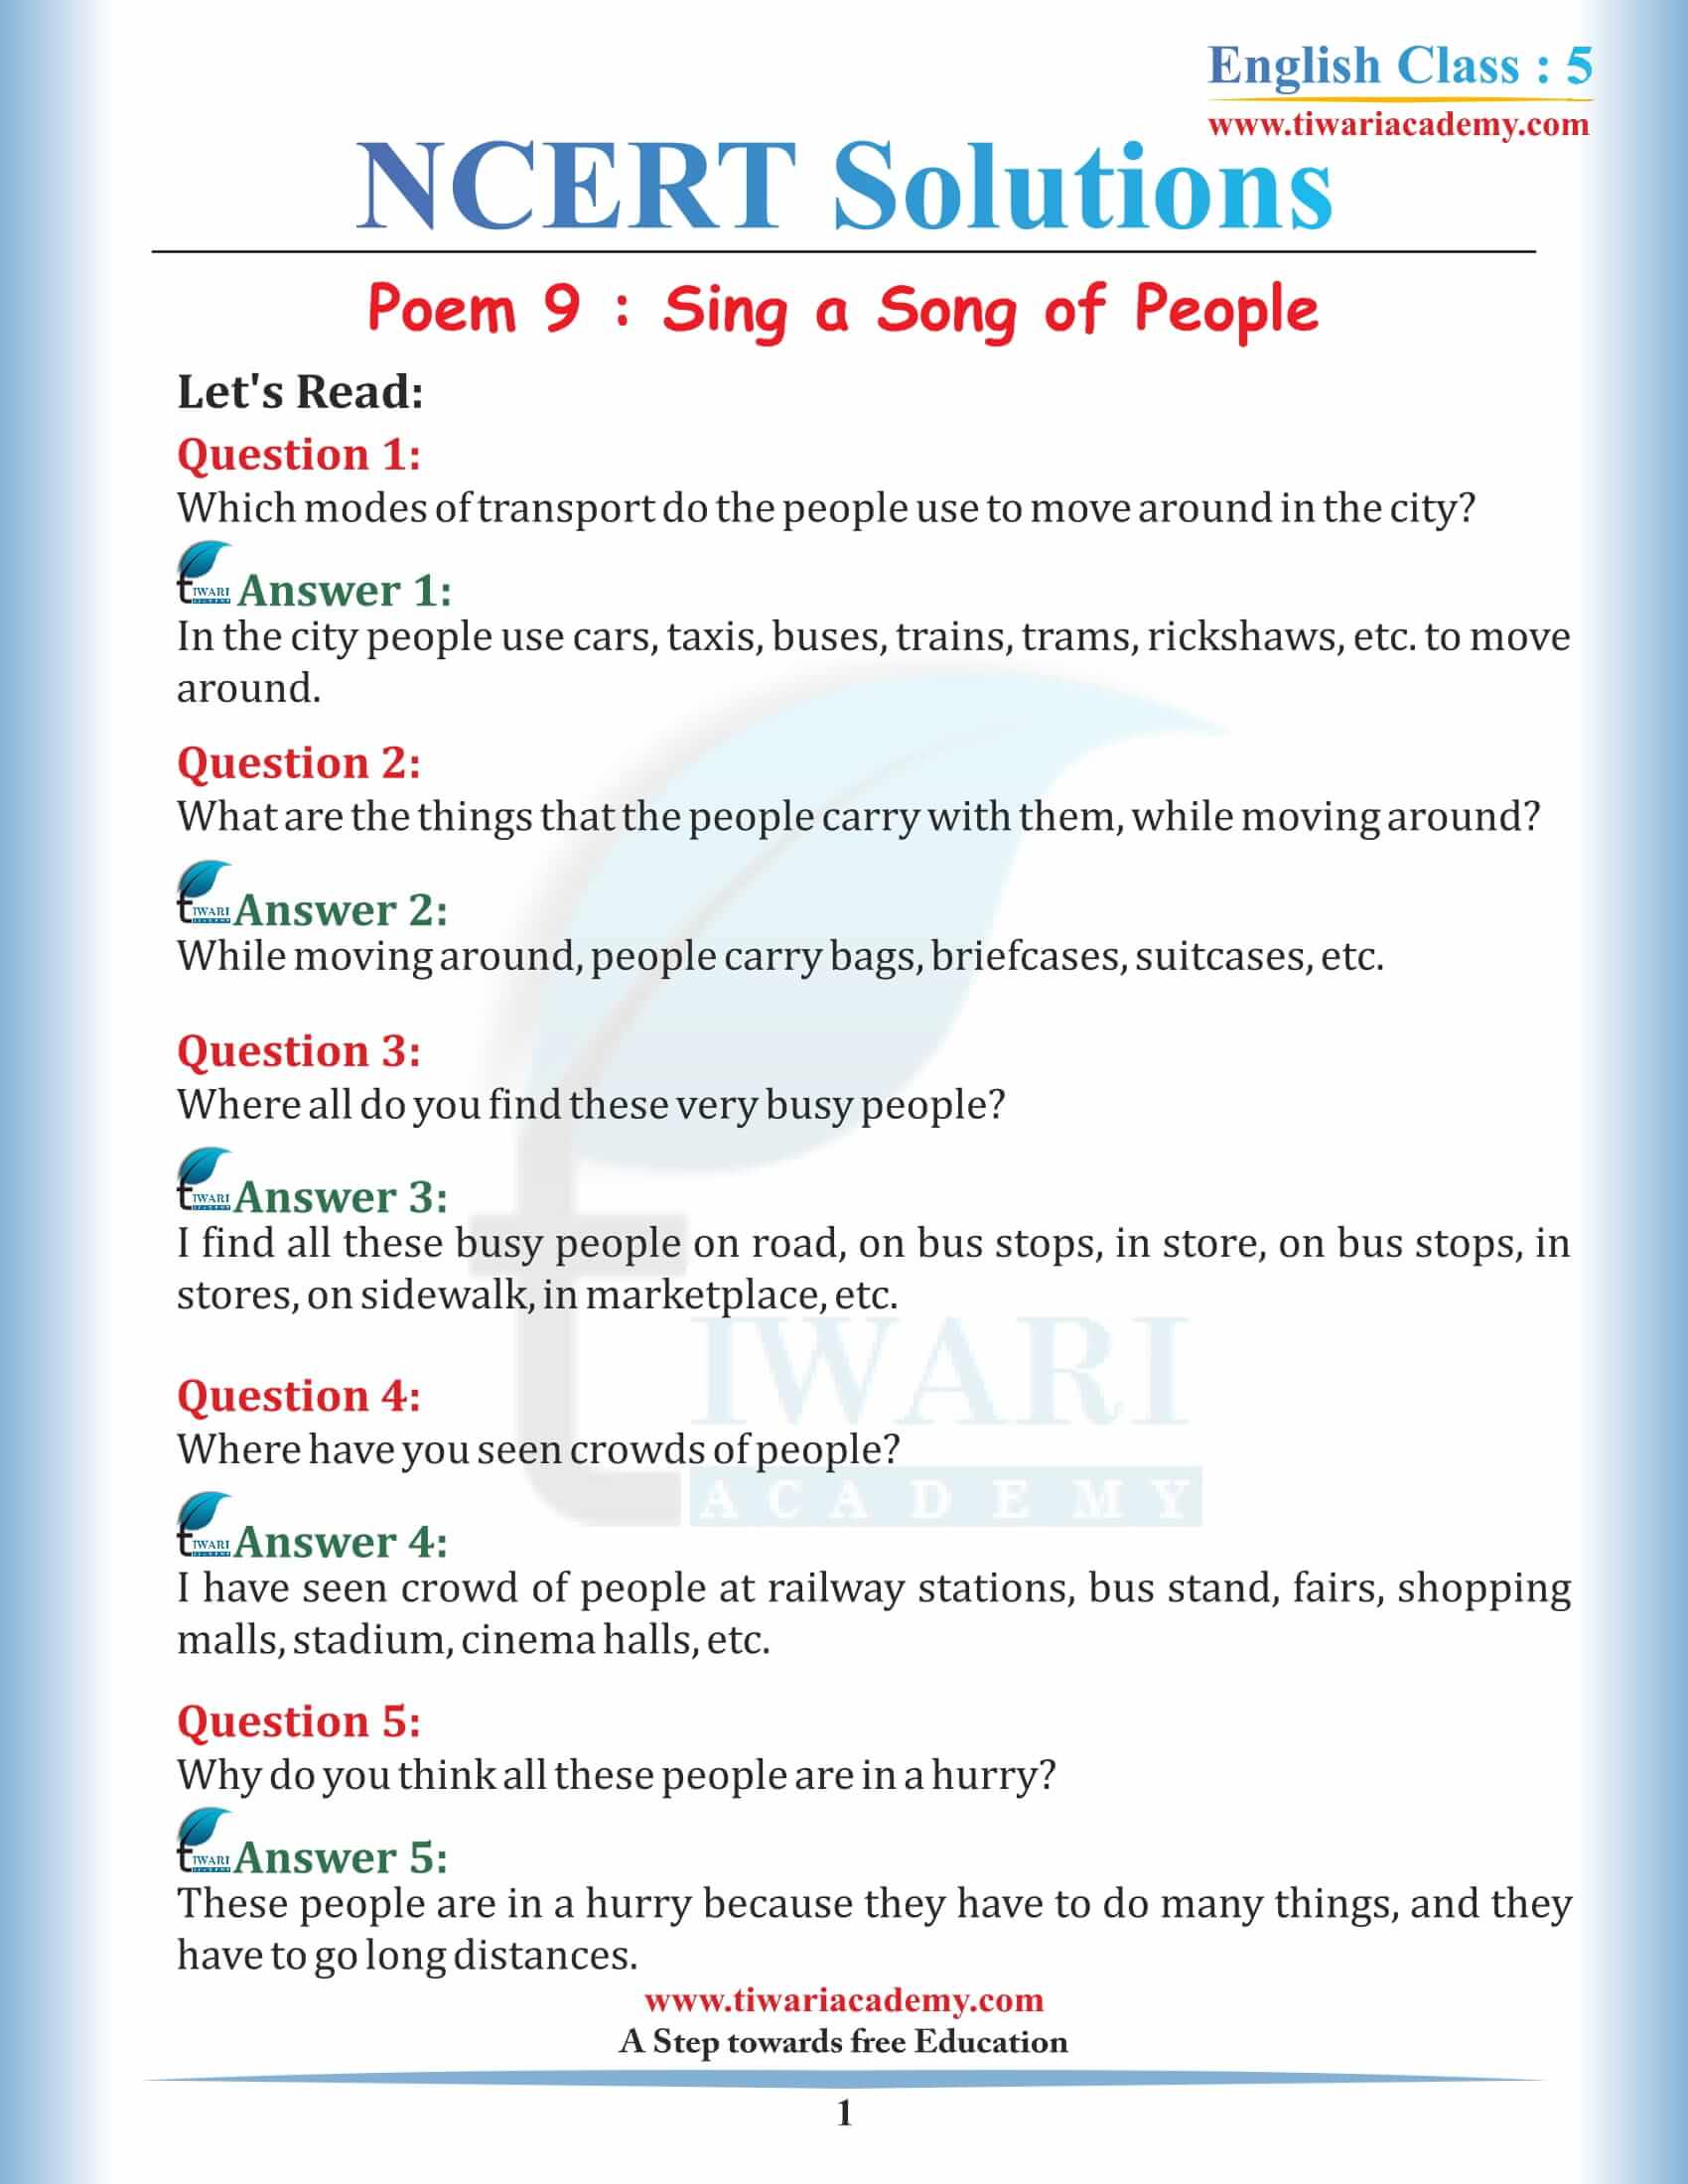 NCERT Solutions for Class 5 English Chapter 9 Sing a Song of People